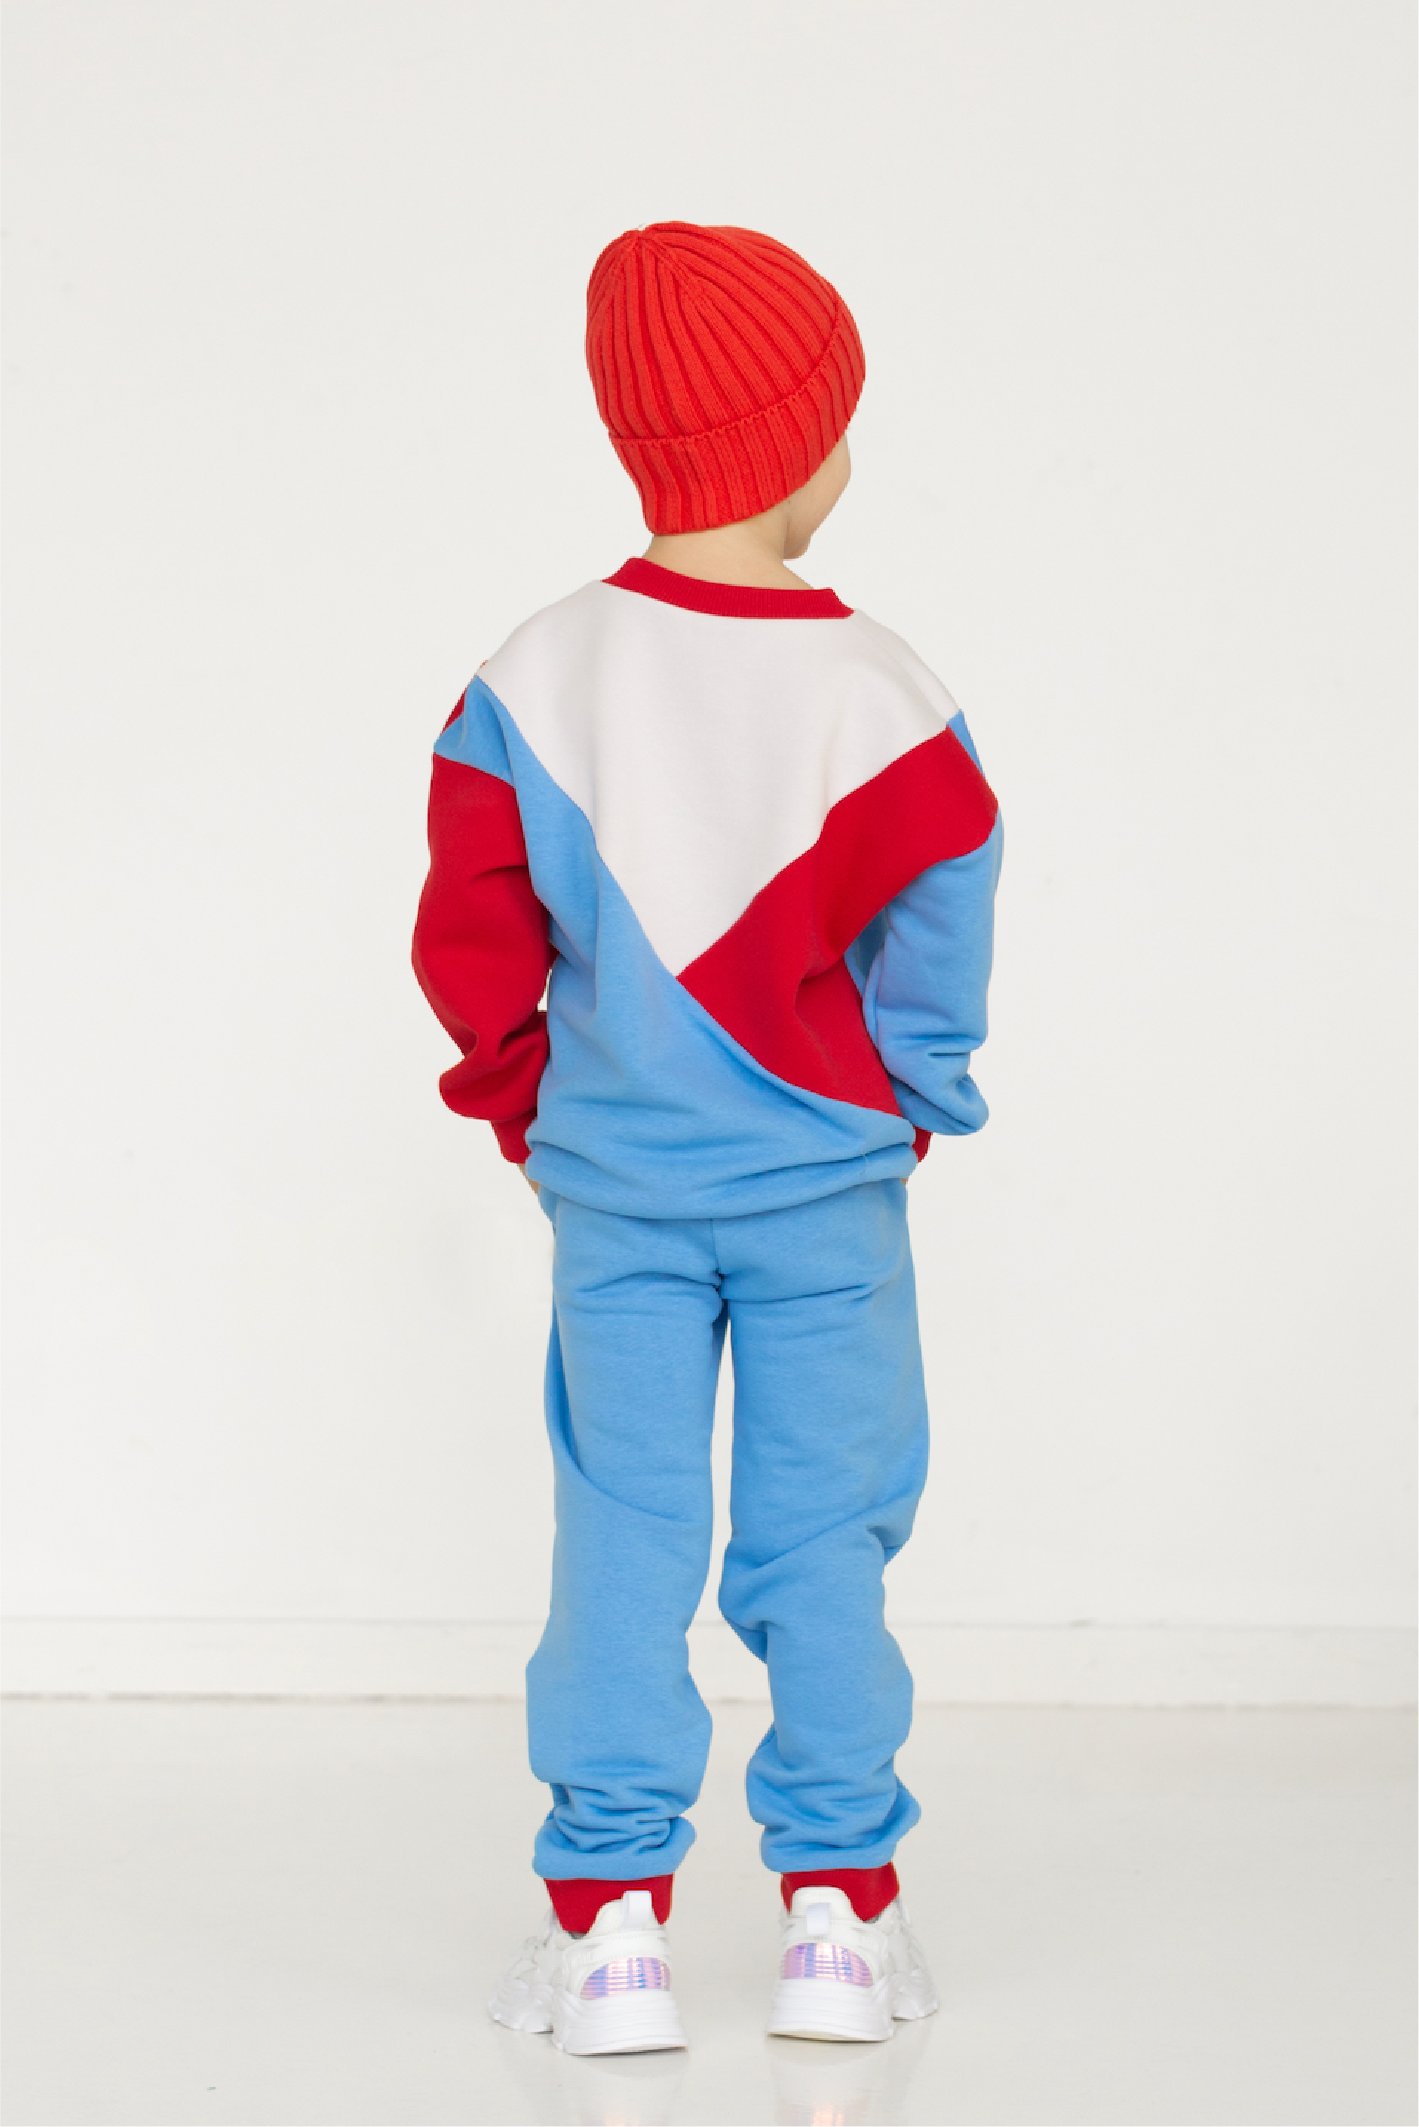 Regular fit jogger sweatpants with side pockets and optional back welt pocket - PDF sewing pattern for girls and boys - age 1-10 years